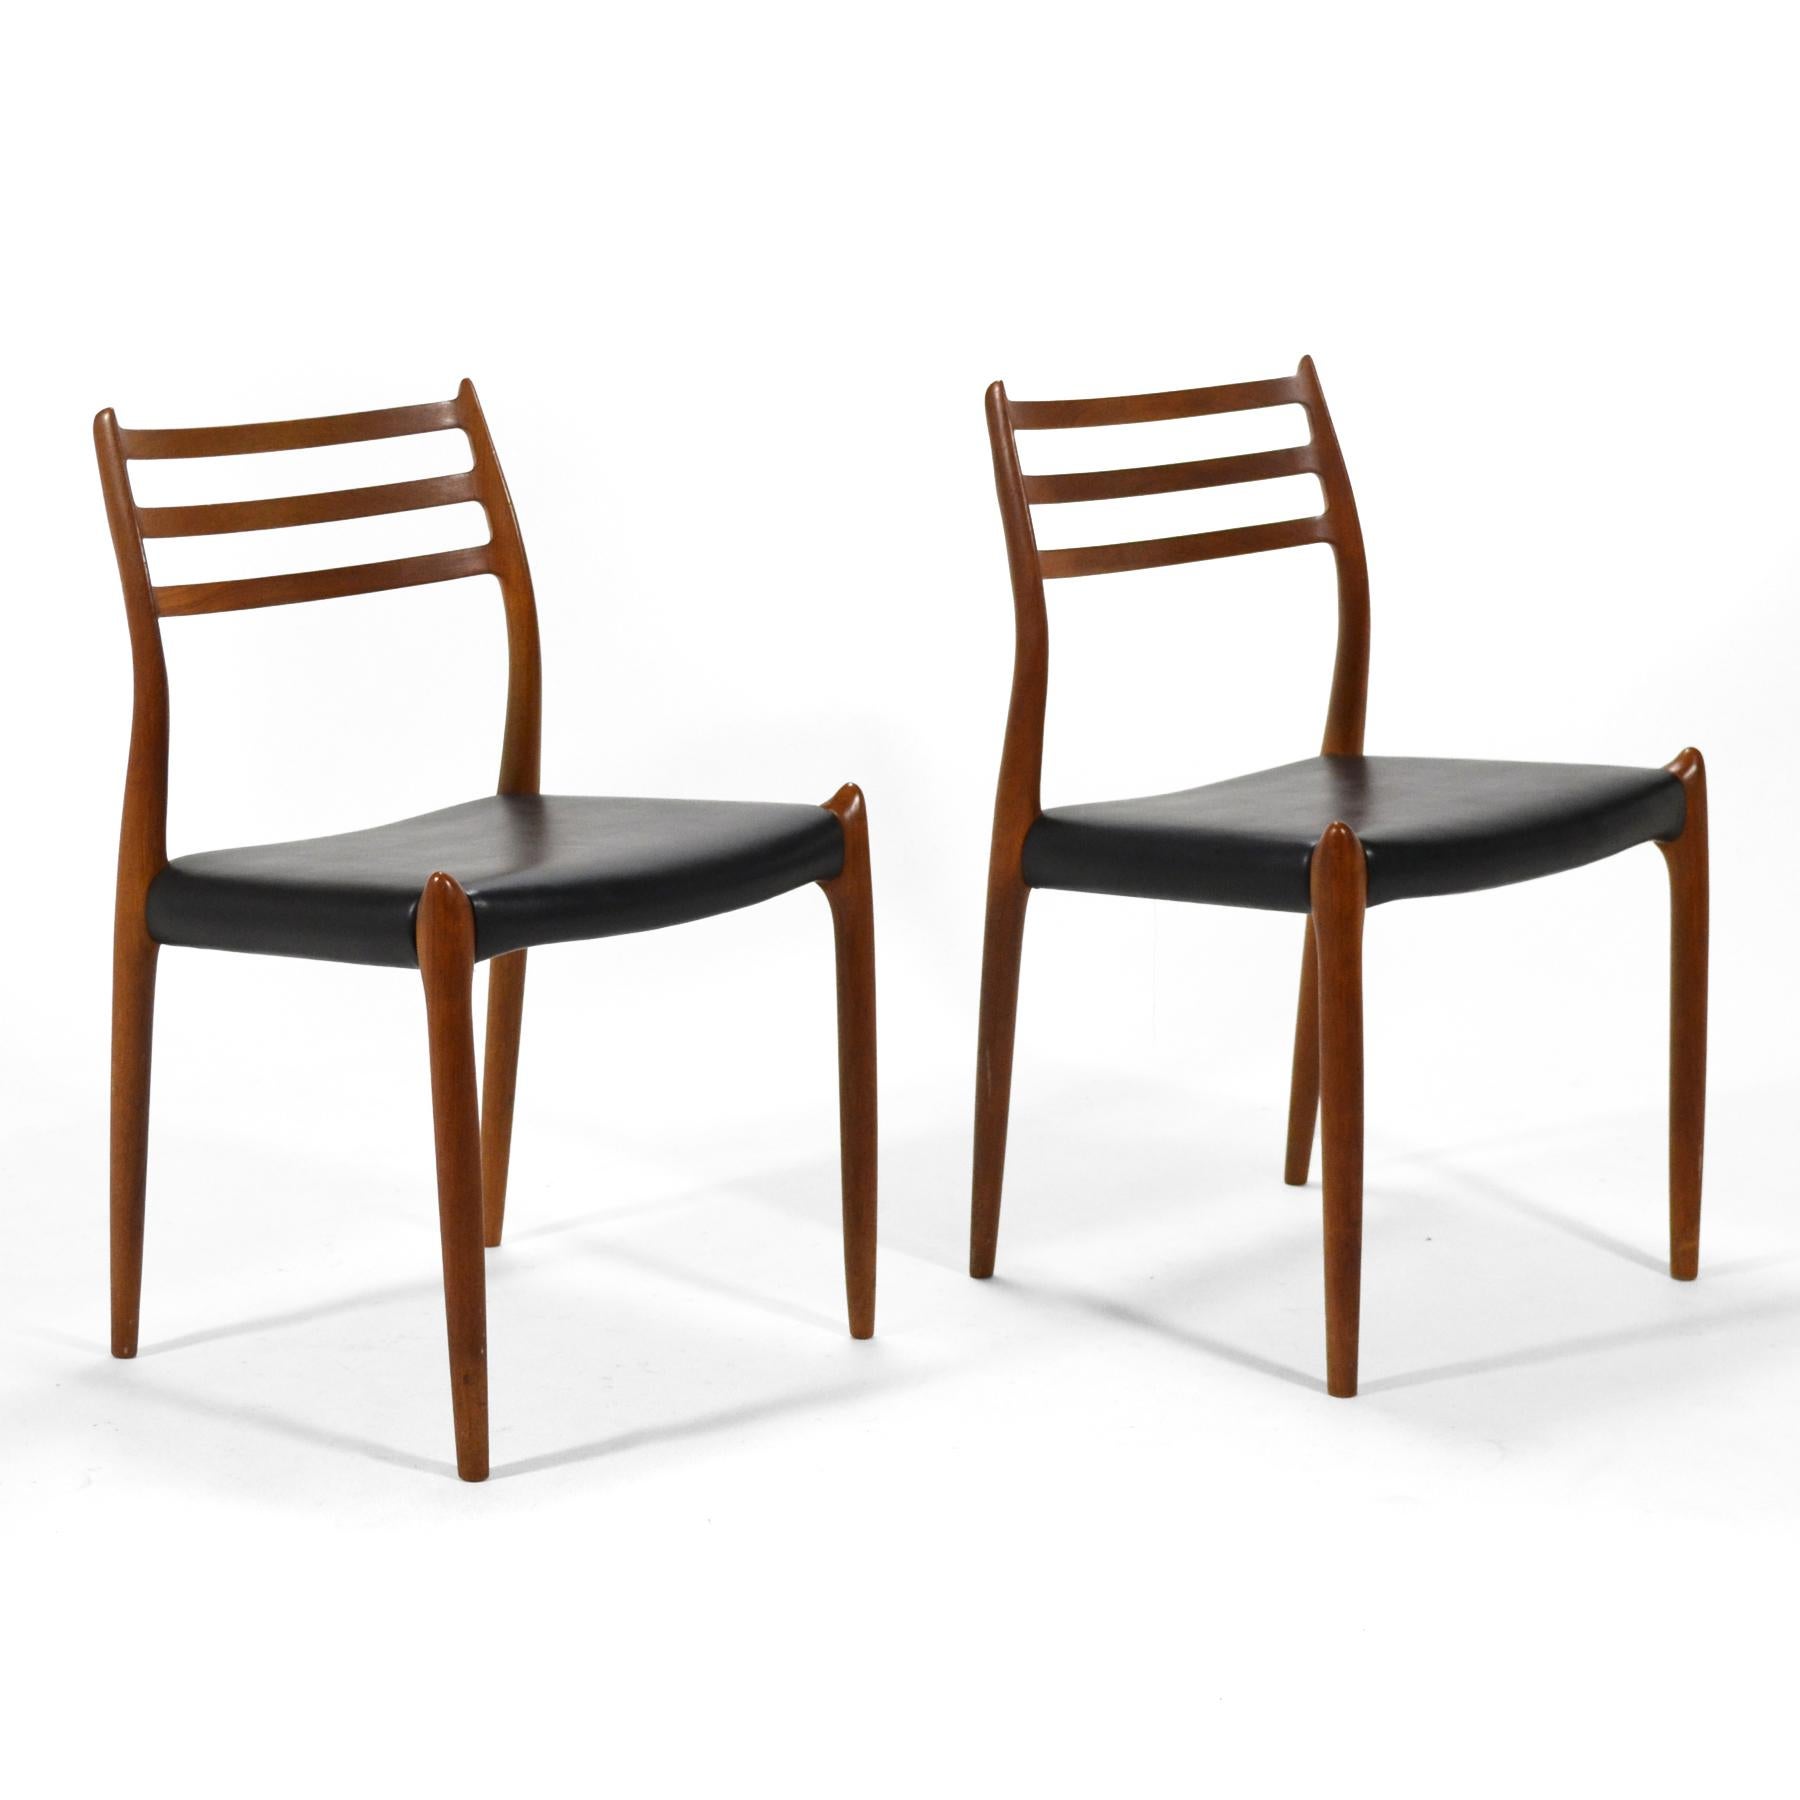 Beautiful pair of Niels Moller model 78 chairs executed in teak by J.L. Moller. The soft contours and fluid lines are as beautiful as the expert craftsmanship.